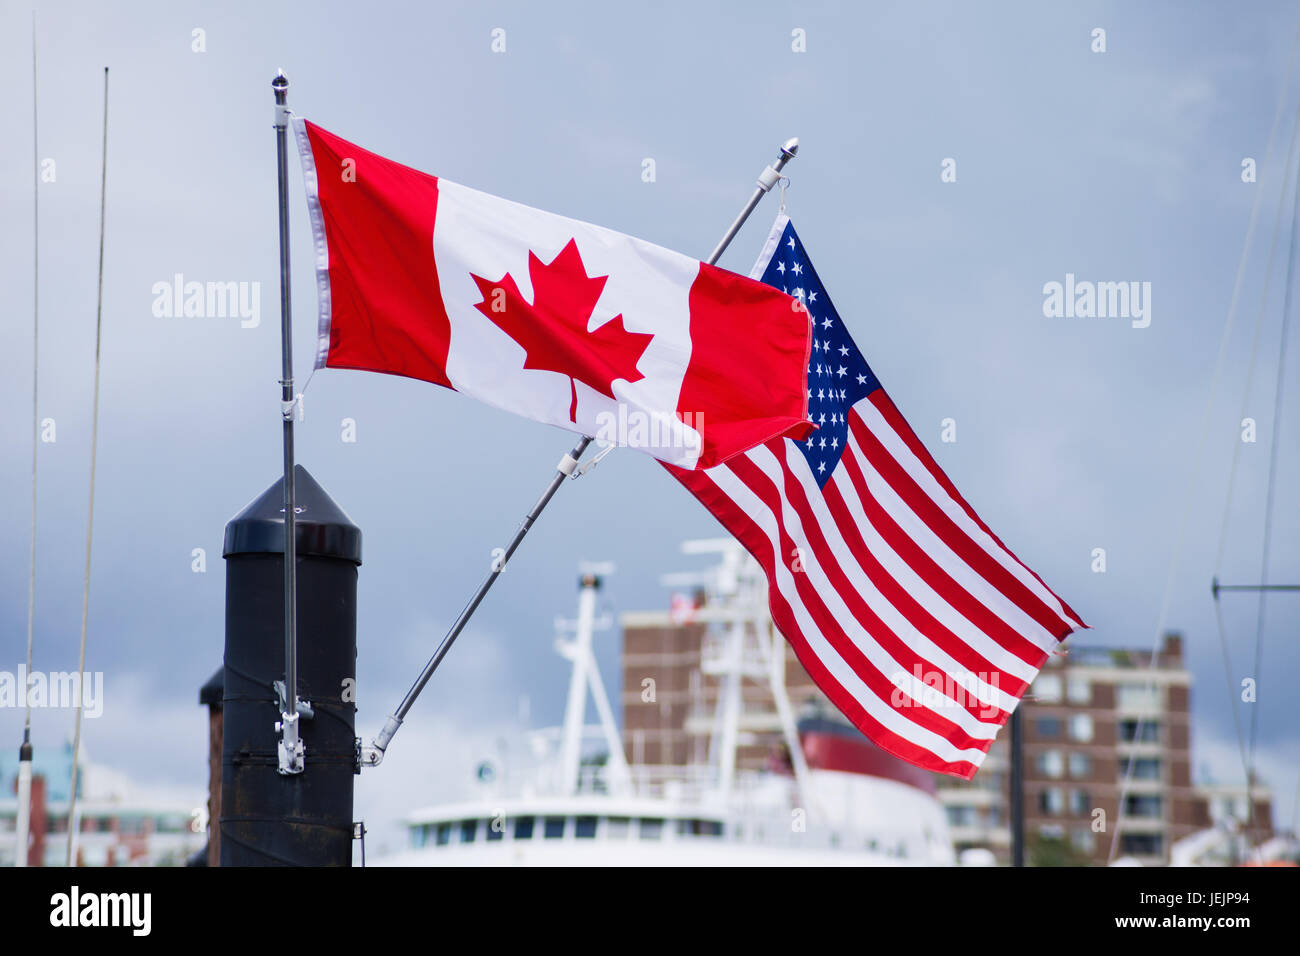 Flags of Canada Canadian and USA American blowing in wind Stock Photo